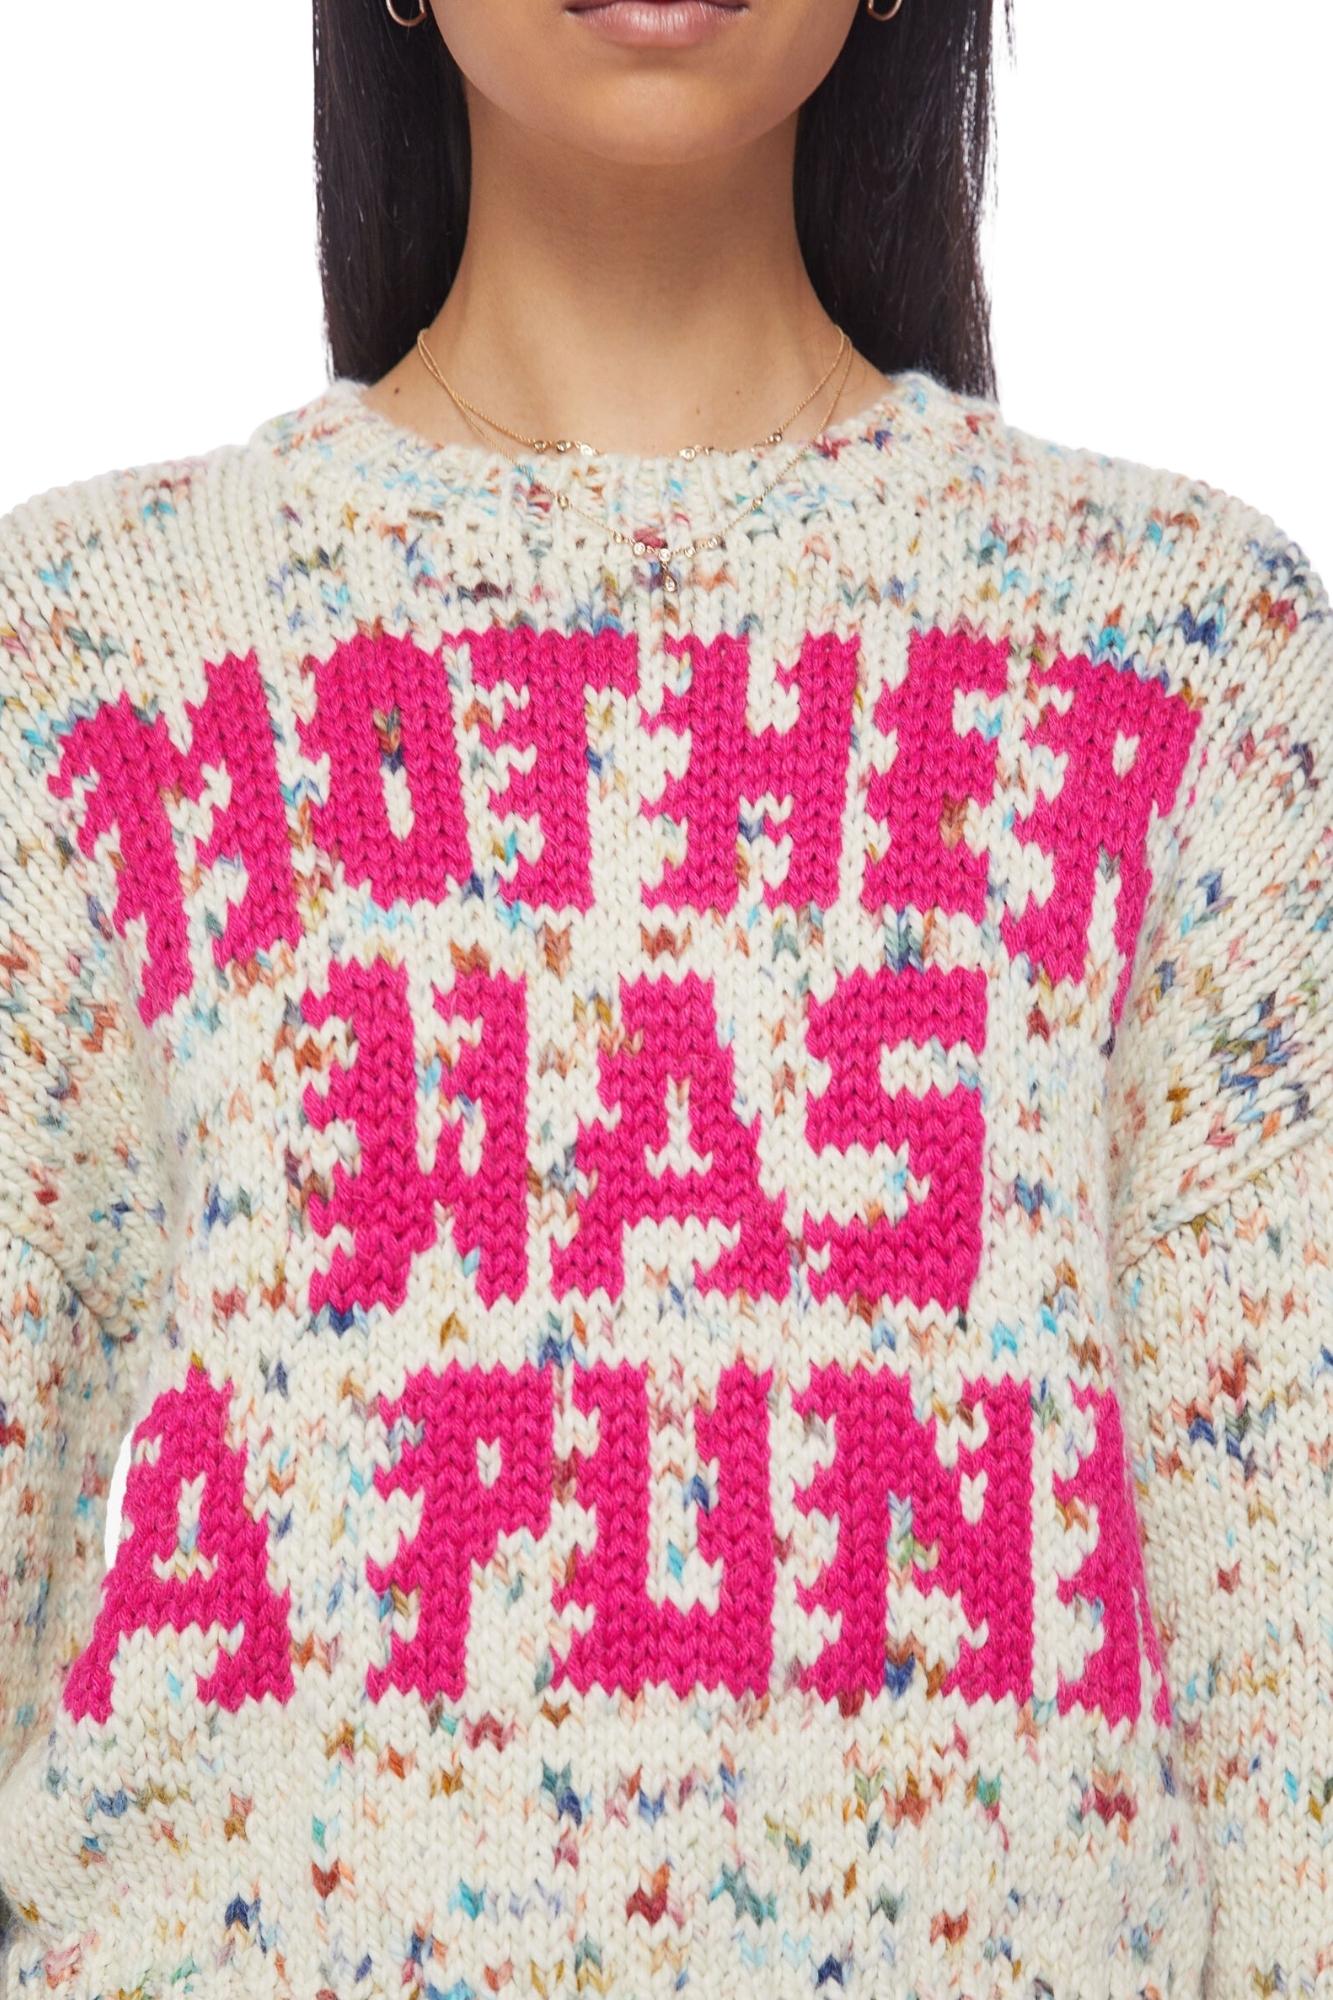     mother-punk-sweater3